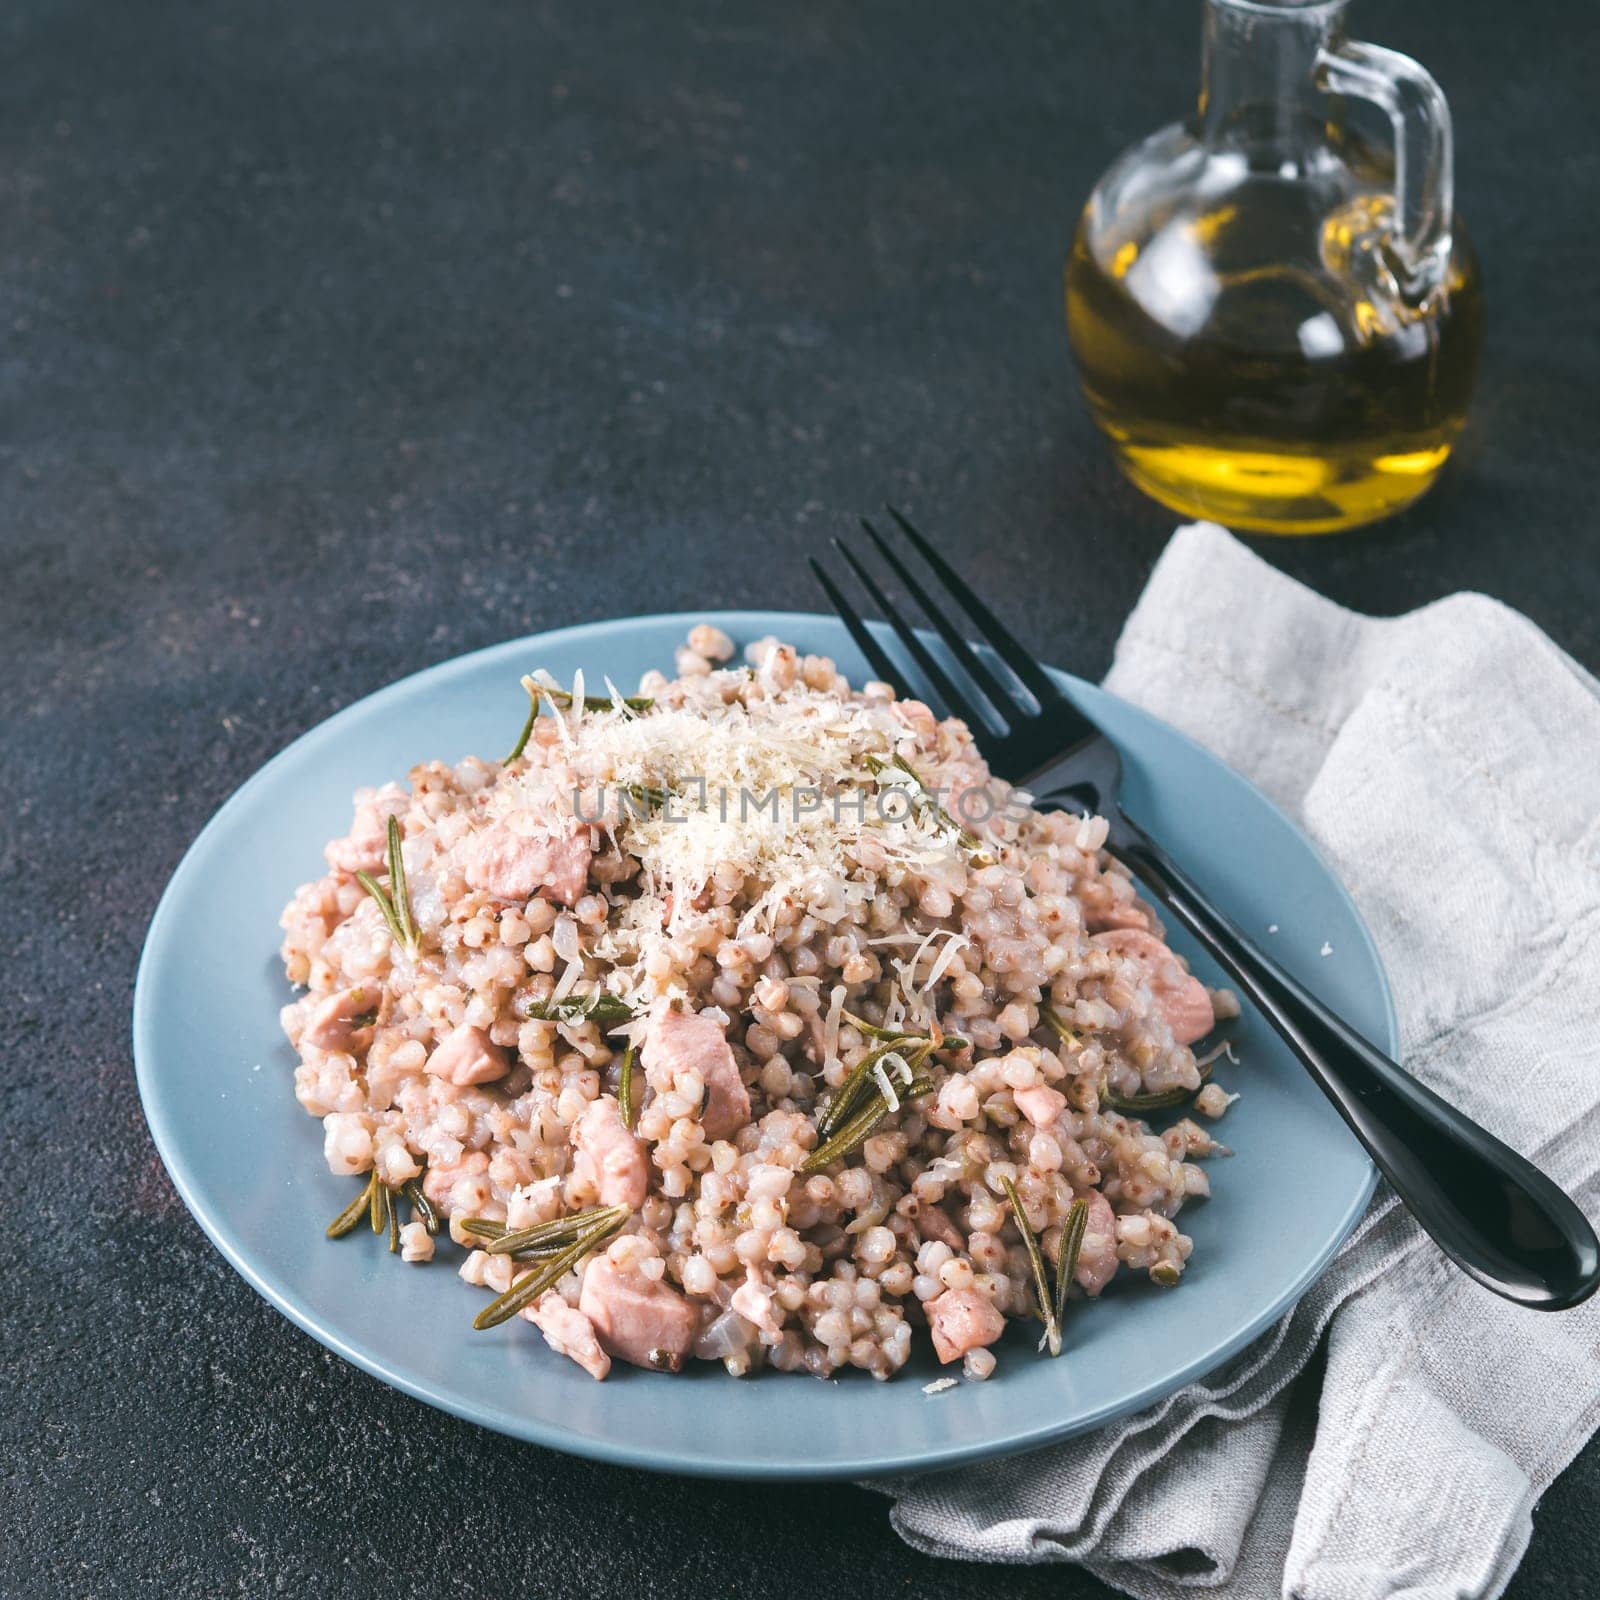 Raw buckwheat risotto with chicken meat and rosemary served parmesan cheese in gray plate on black cement background. Gluten-free and buckwheat recipe ideas. Copy space. Toned image.